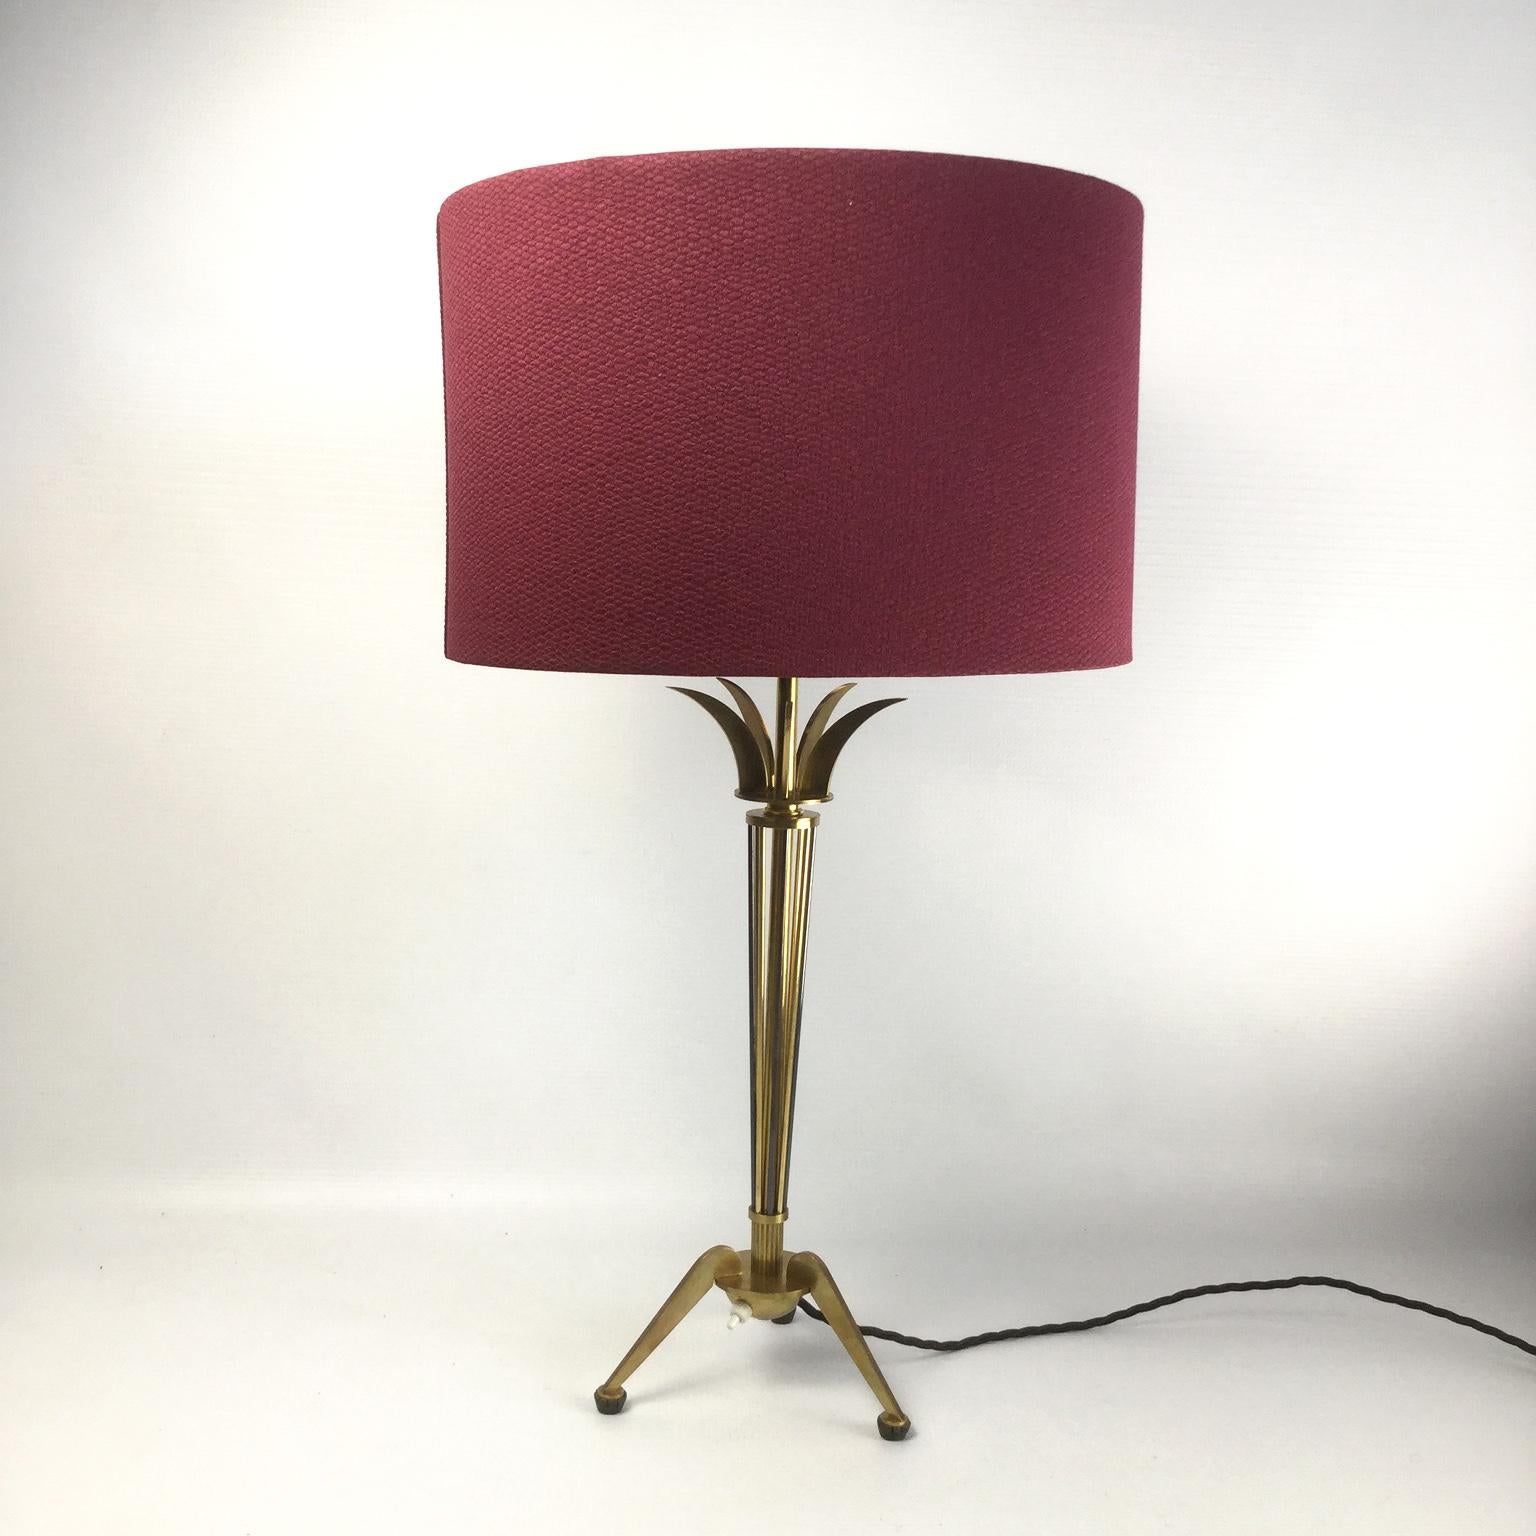 Pair of 1950s table lamp manufactured and edited by Maison Arlus for Maison Jansen
With a golden brass finish and gun barrel patina.
Rewired with black cotton-insulated cable
Burgundy lamp shade with reflective bronze interior
Small mark inside on